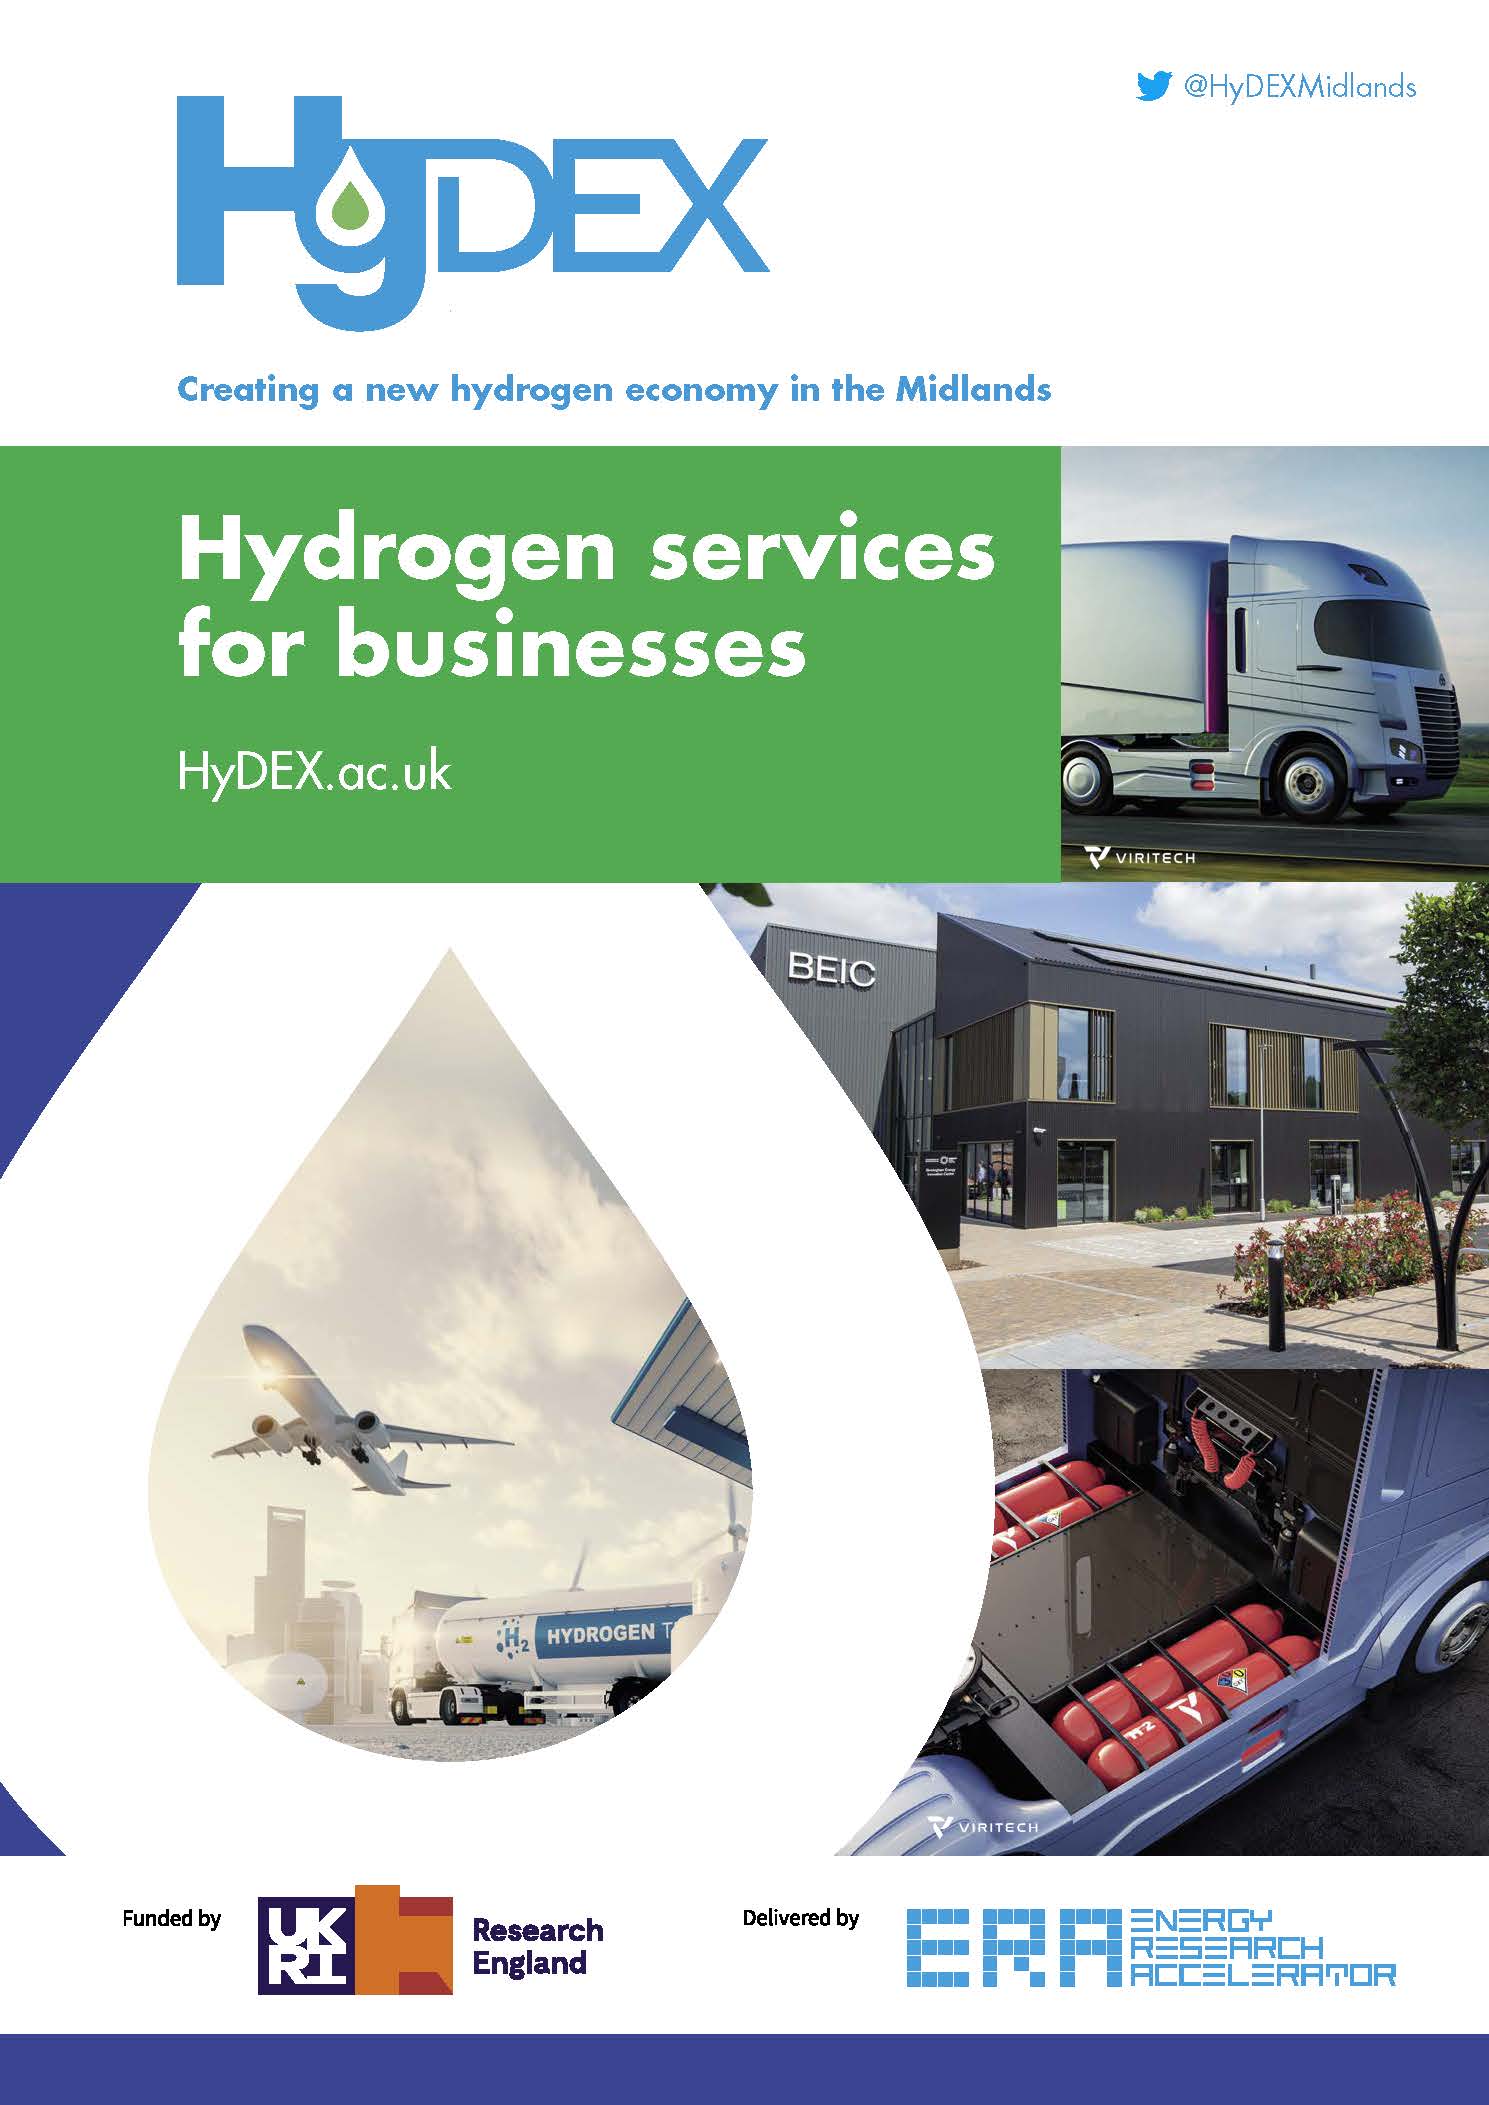 HyDEX hydrogen services for business brochure